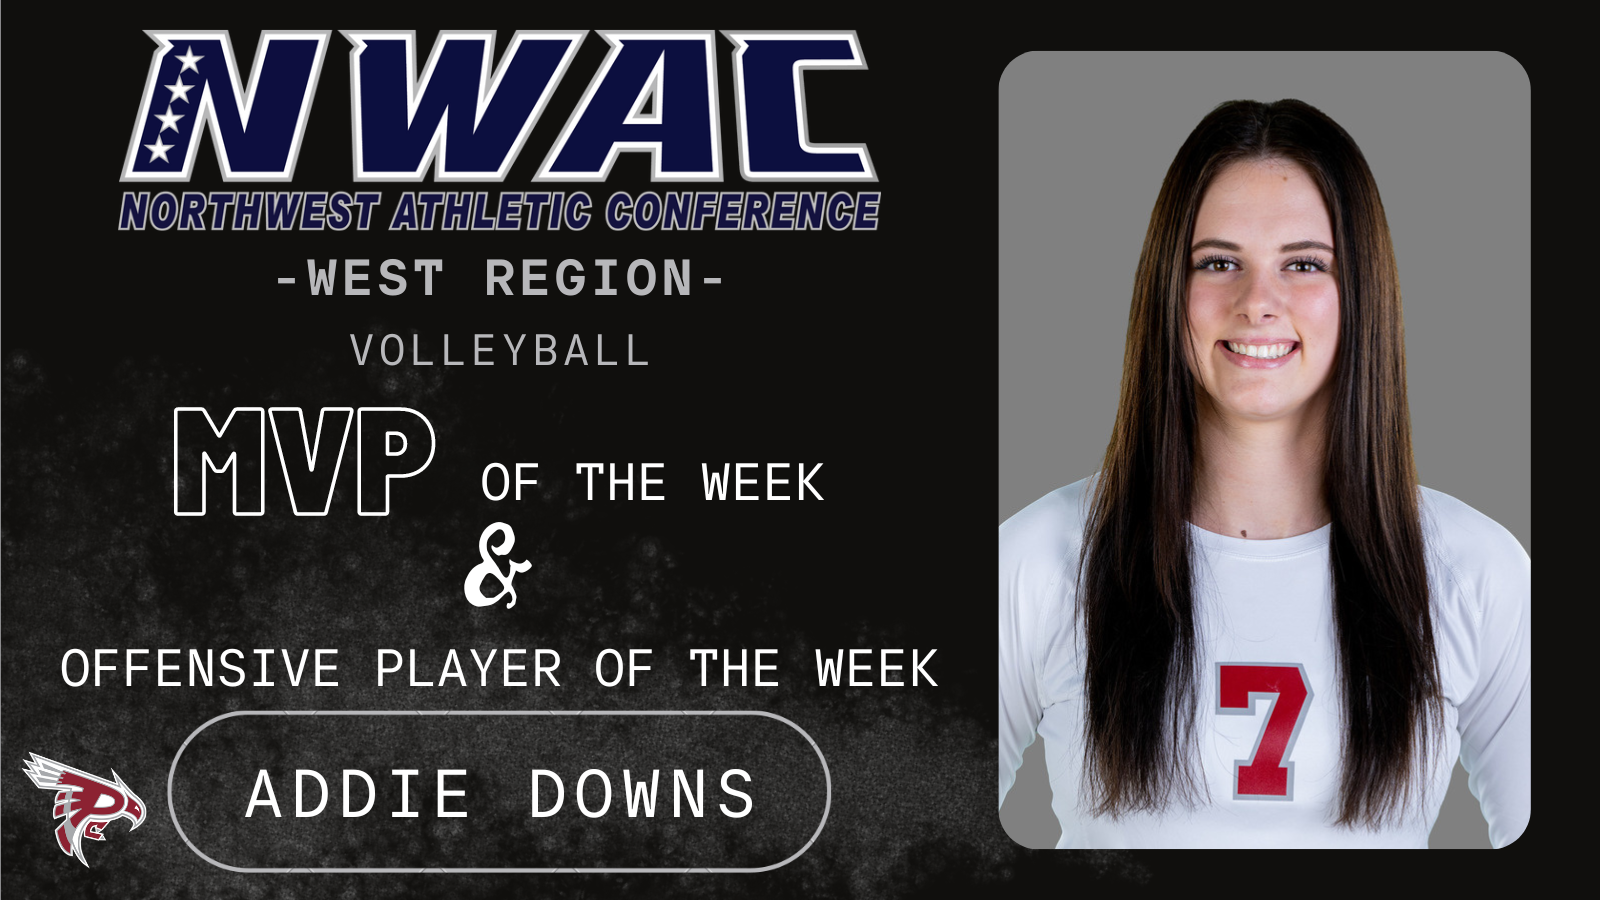 Downs named NWAC West Region MVP of the Week AND Offensive Player of the Week (10/4/22)